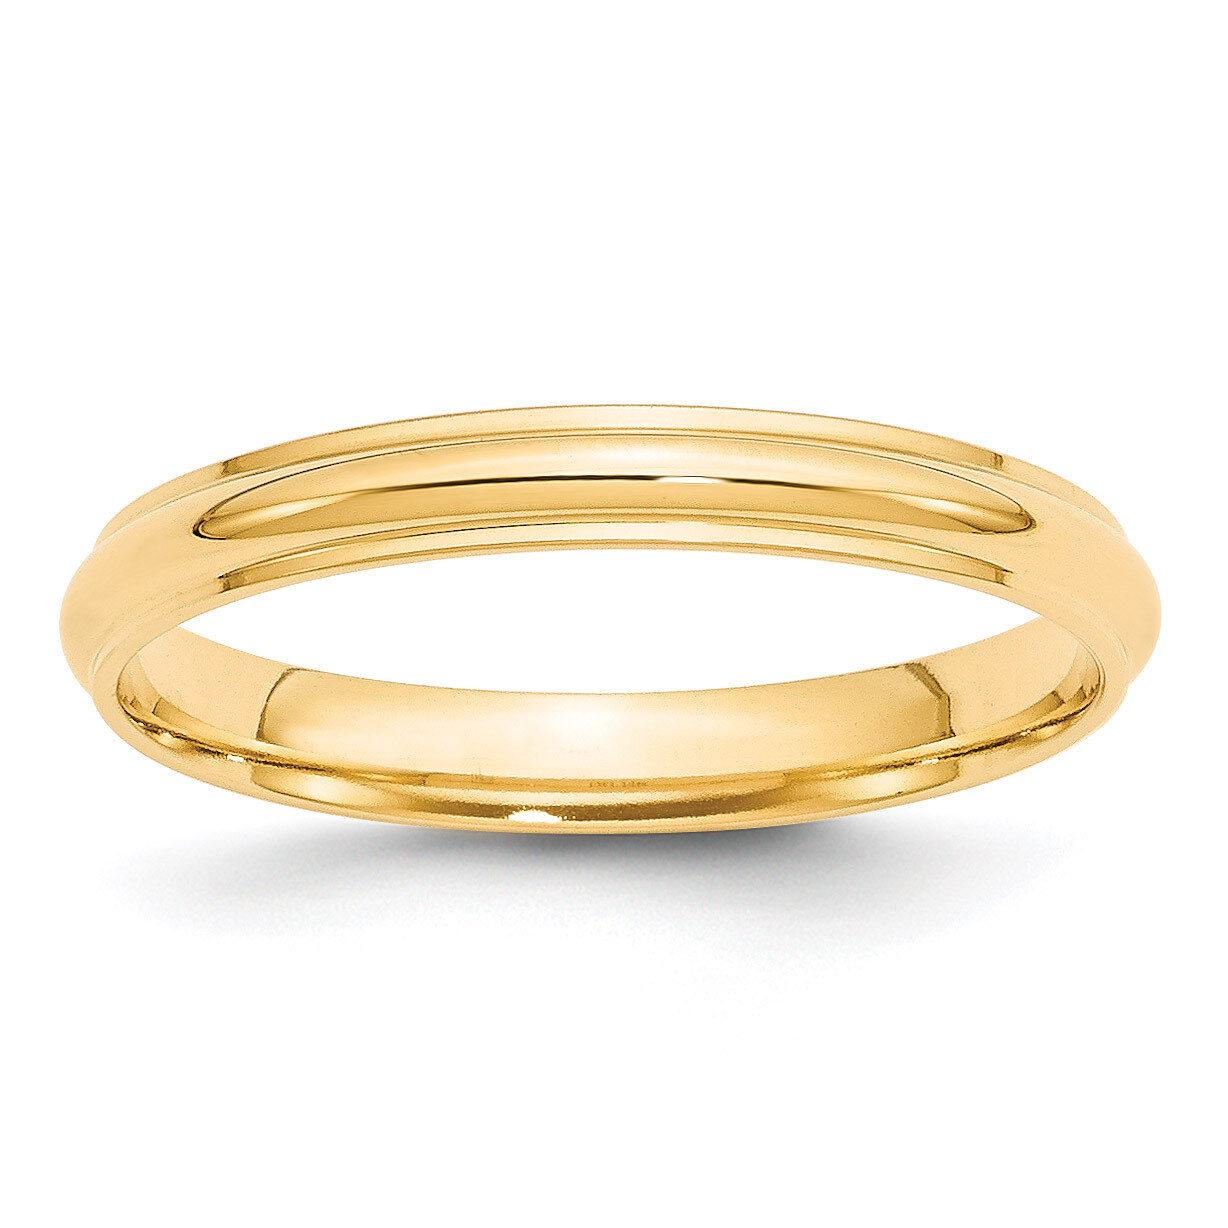 3mm Half Round with Edge Band 14k Yellow Gold HRE030 Engravable